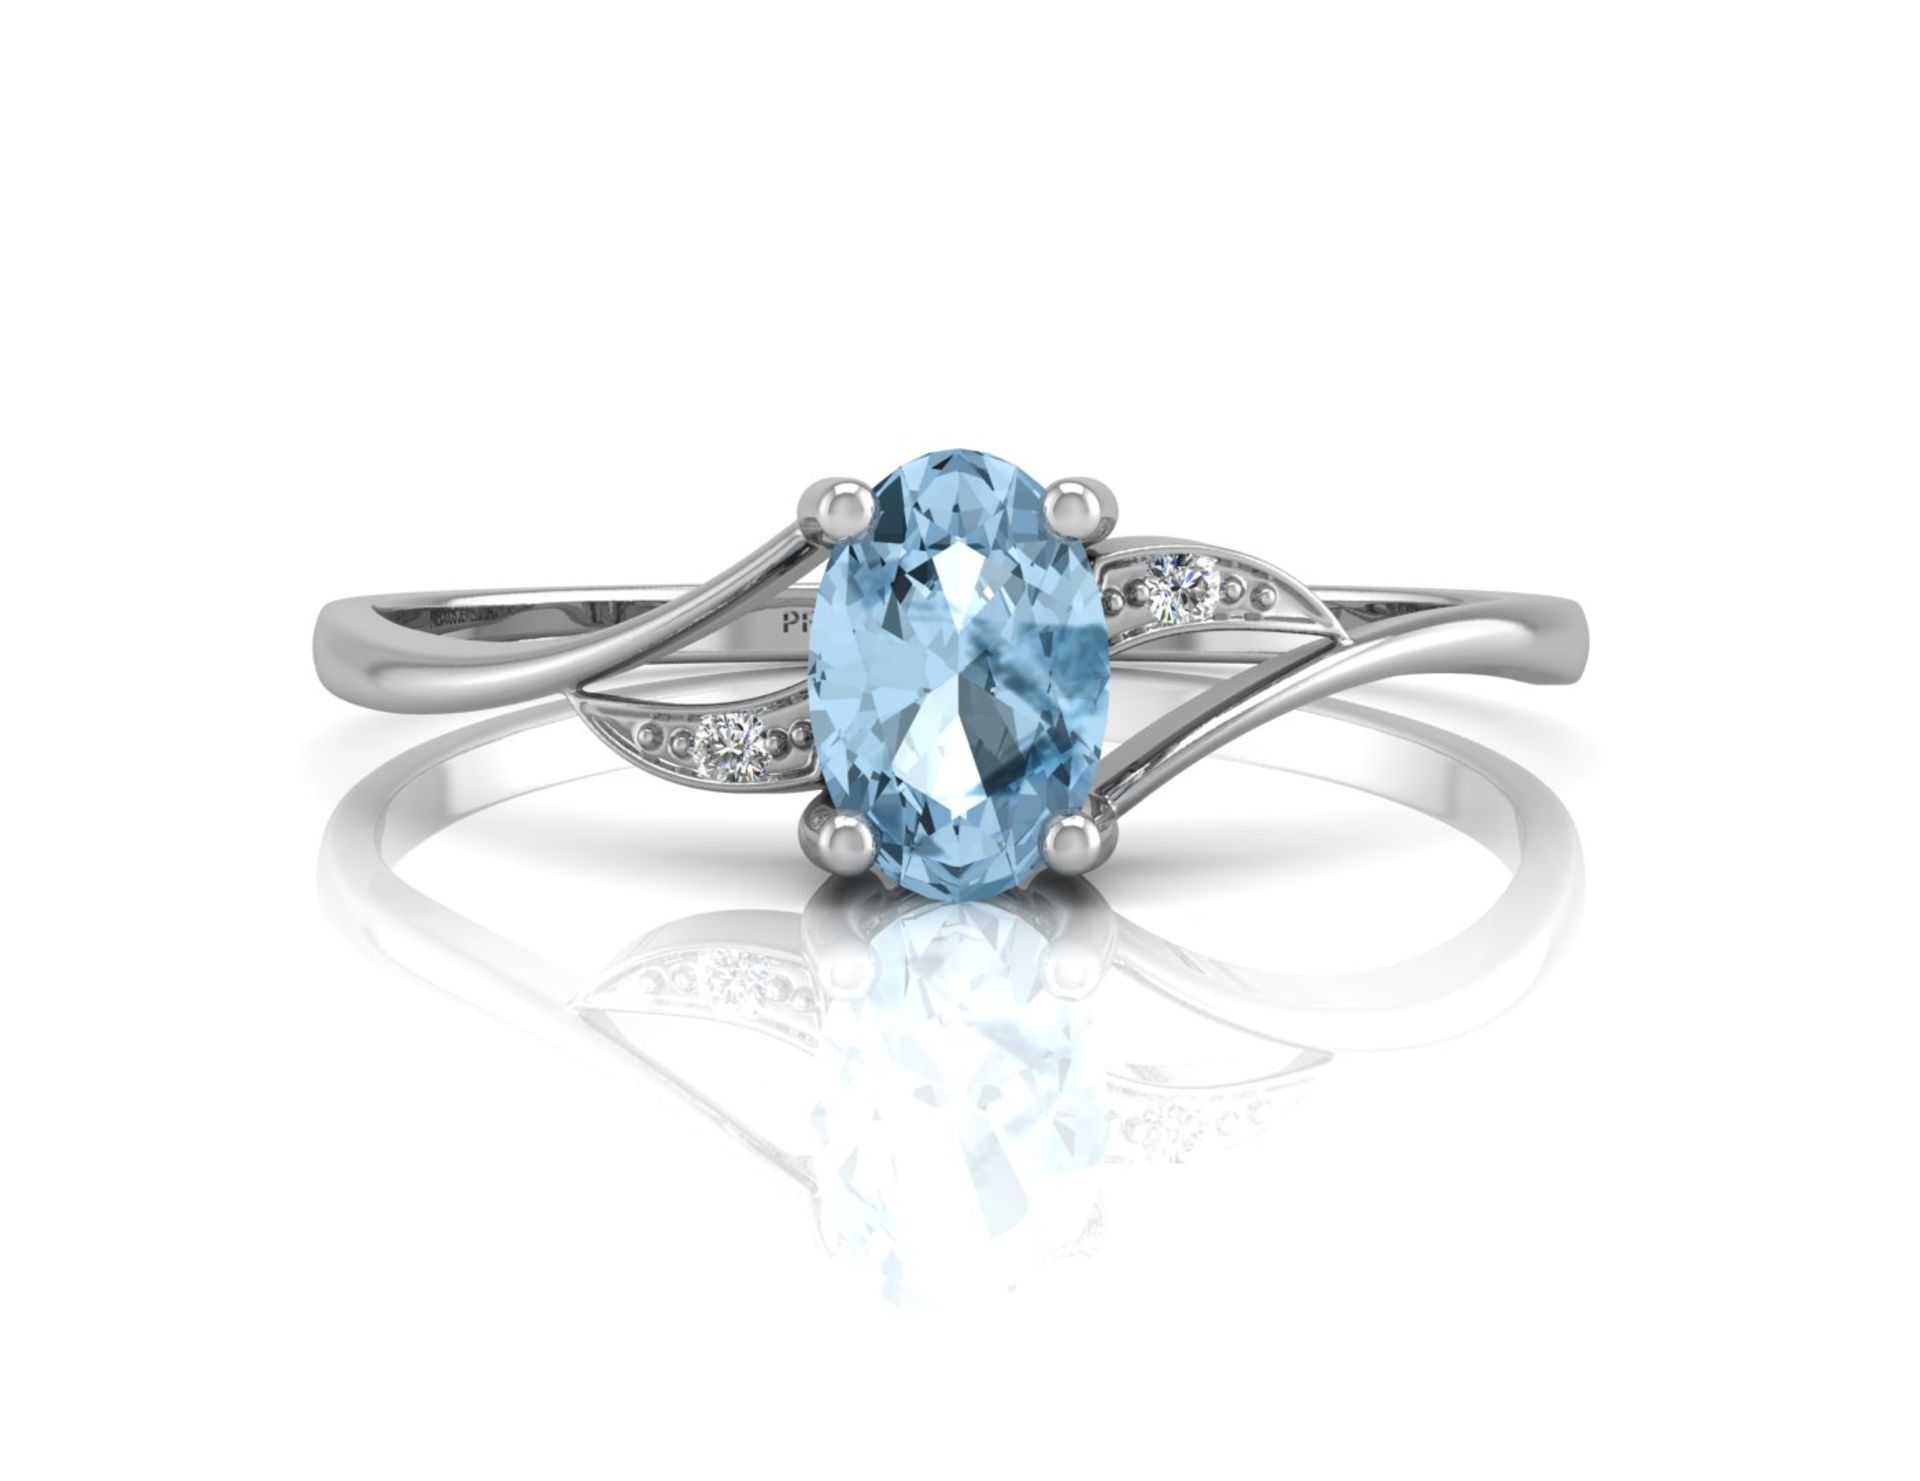 9ct White Gold Diamond And Blue Topaz Ring (BT0.58) 0.01 Carats - Valued By GIE £1,210.00 - An - Image 4 of 5